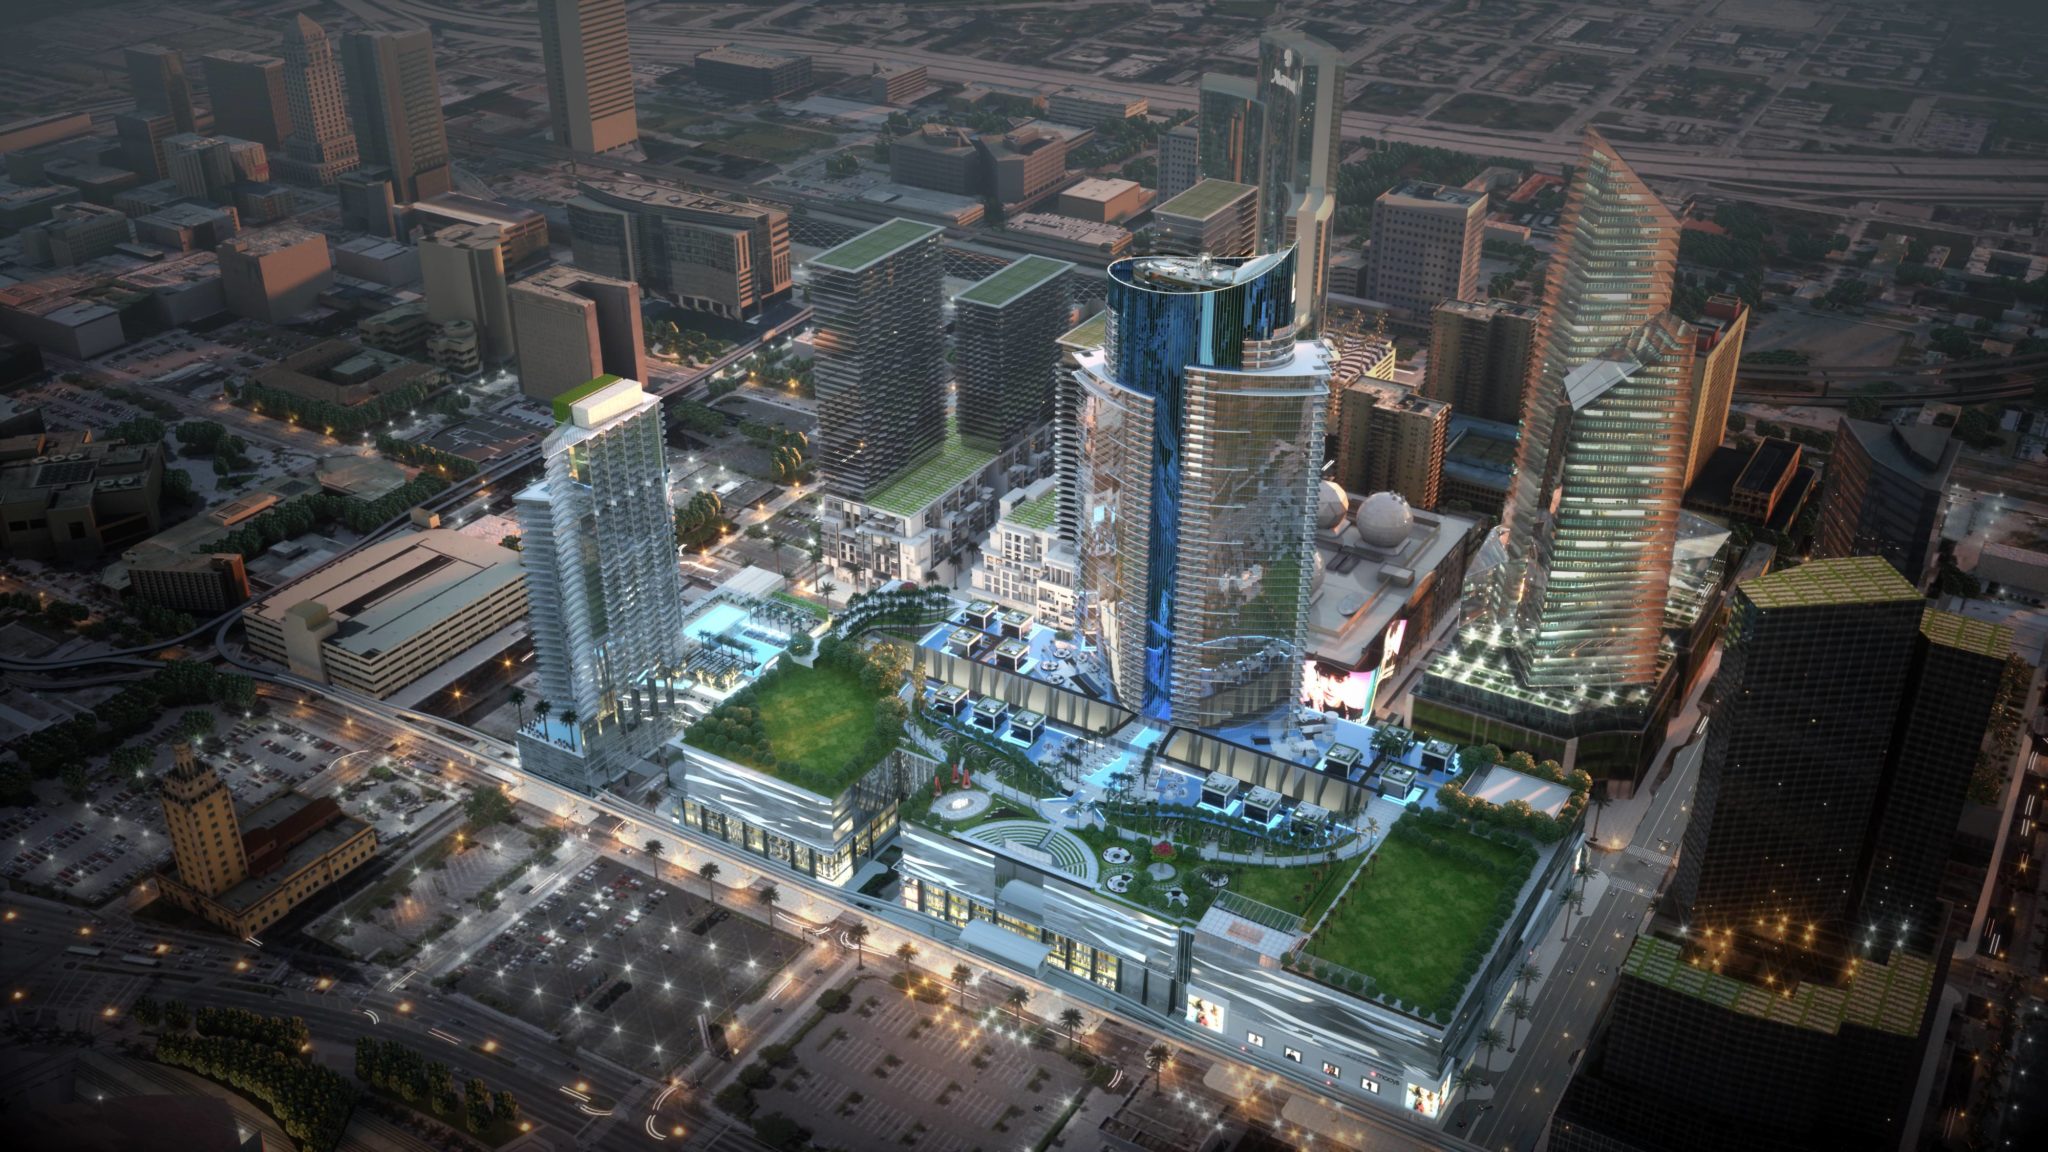 The Miami Worldcenter Makes Headway in Development